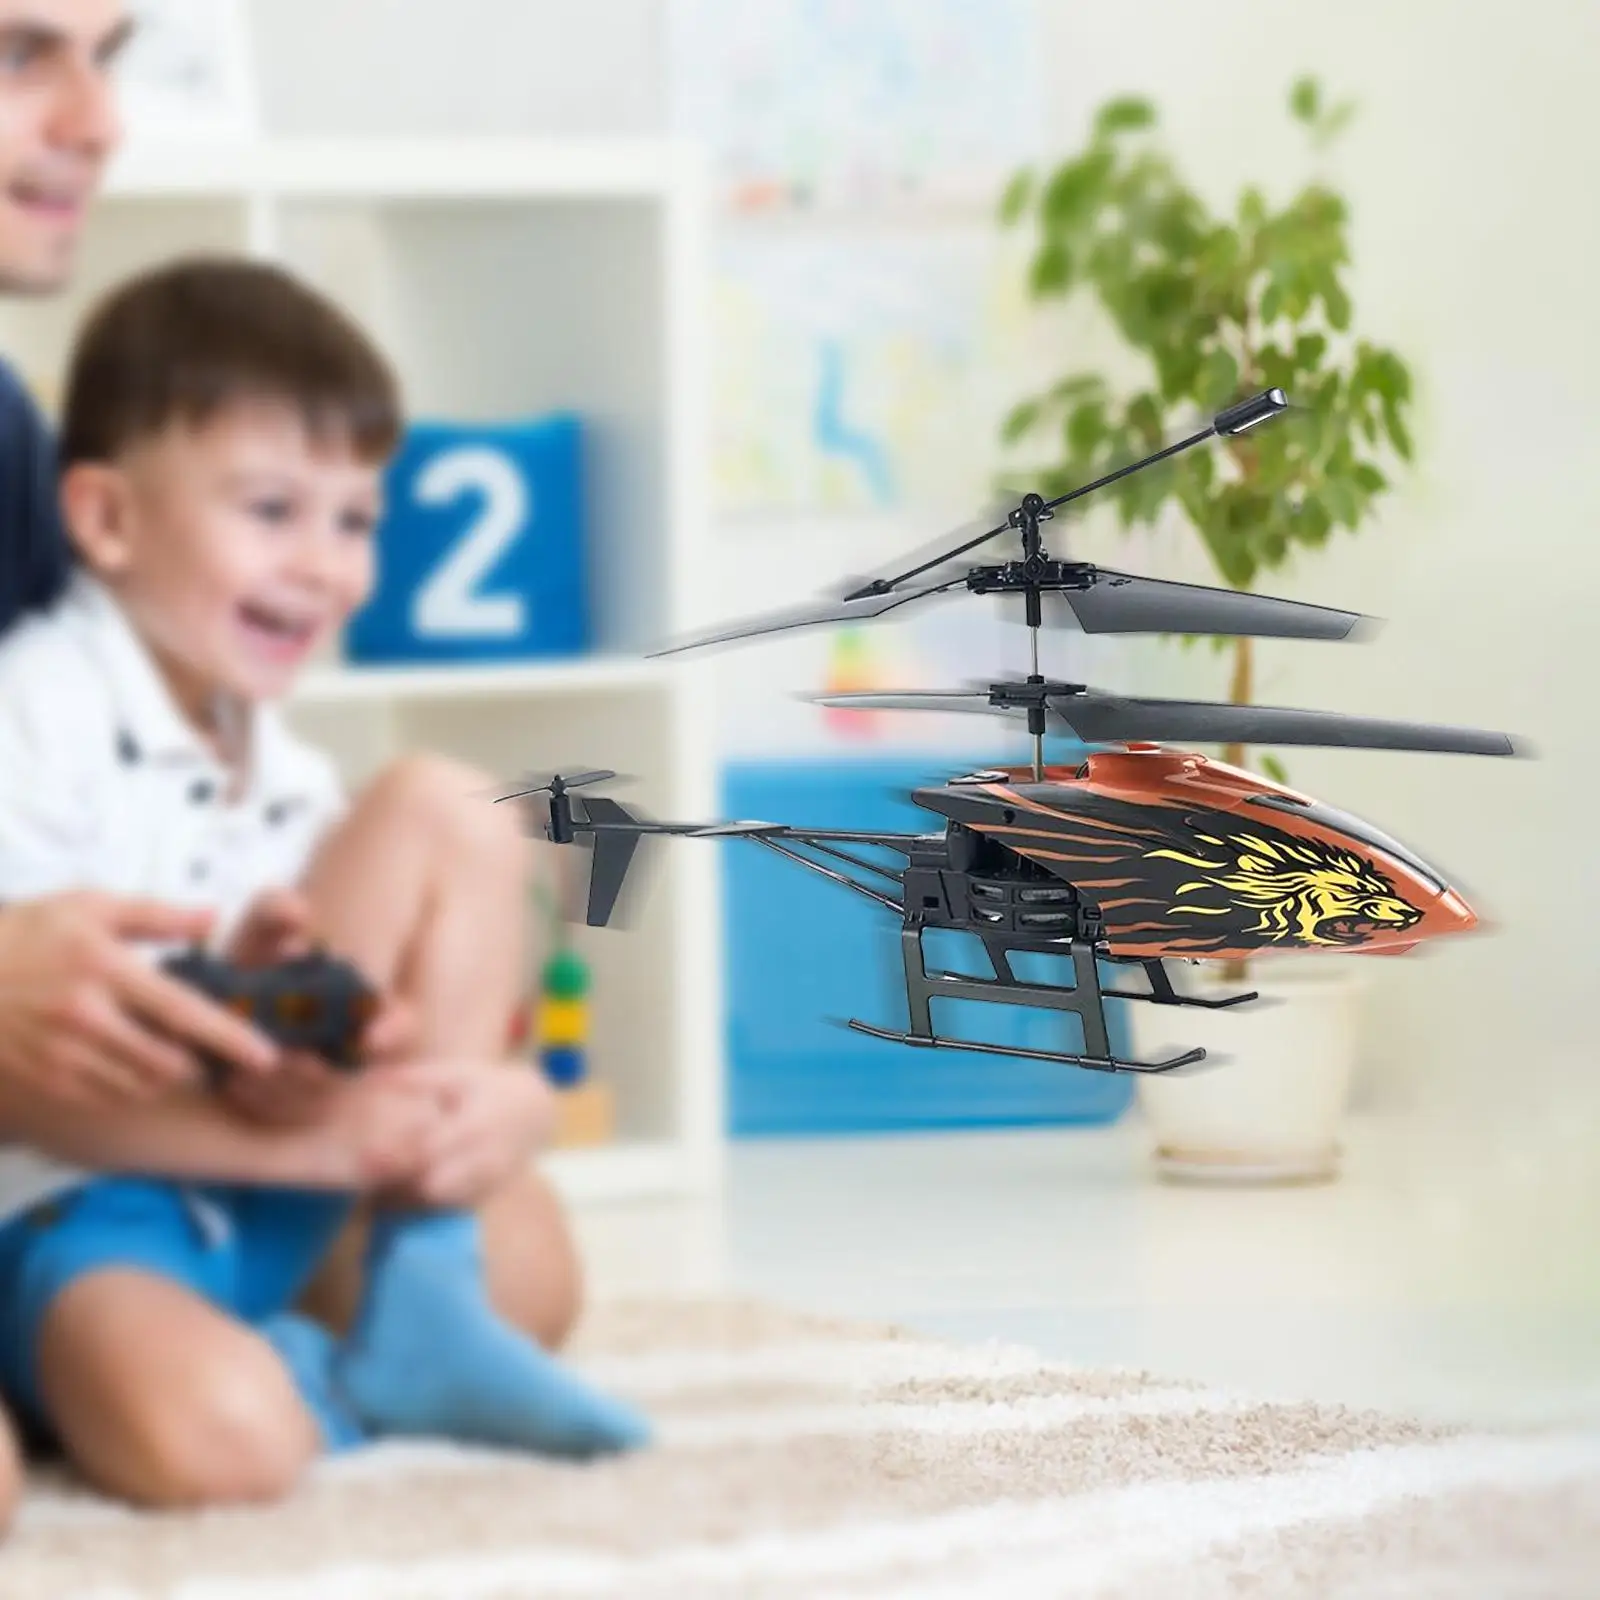 Mini RC Helicopter 2-Channel Flying Plane Anti-Drop for Kids Easy to Fly